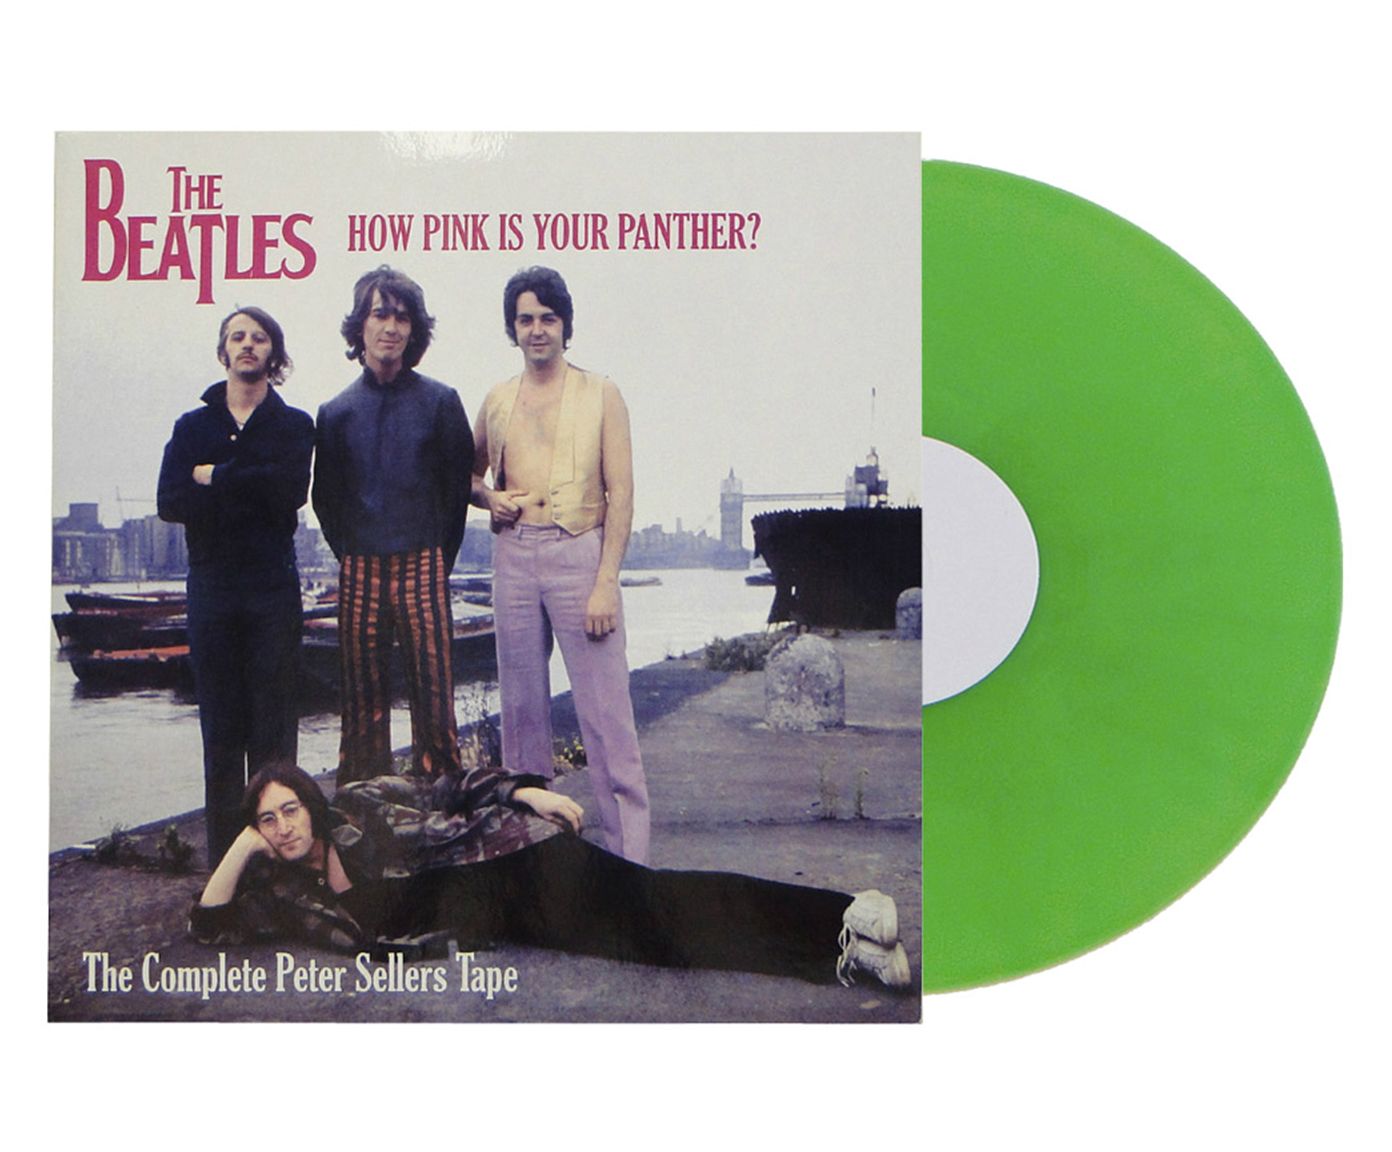 Vinil Importado The Beatles - How Pink Is Your Panther? / The Complete Peter Sellers Tape | Westwing.com.br